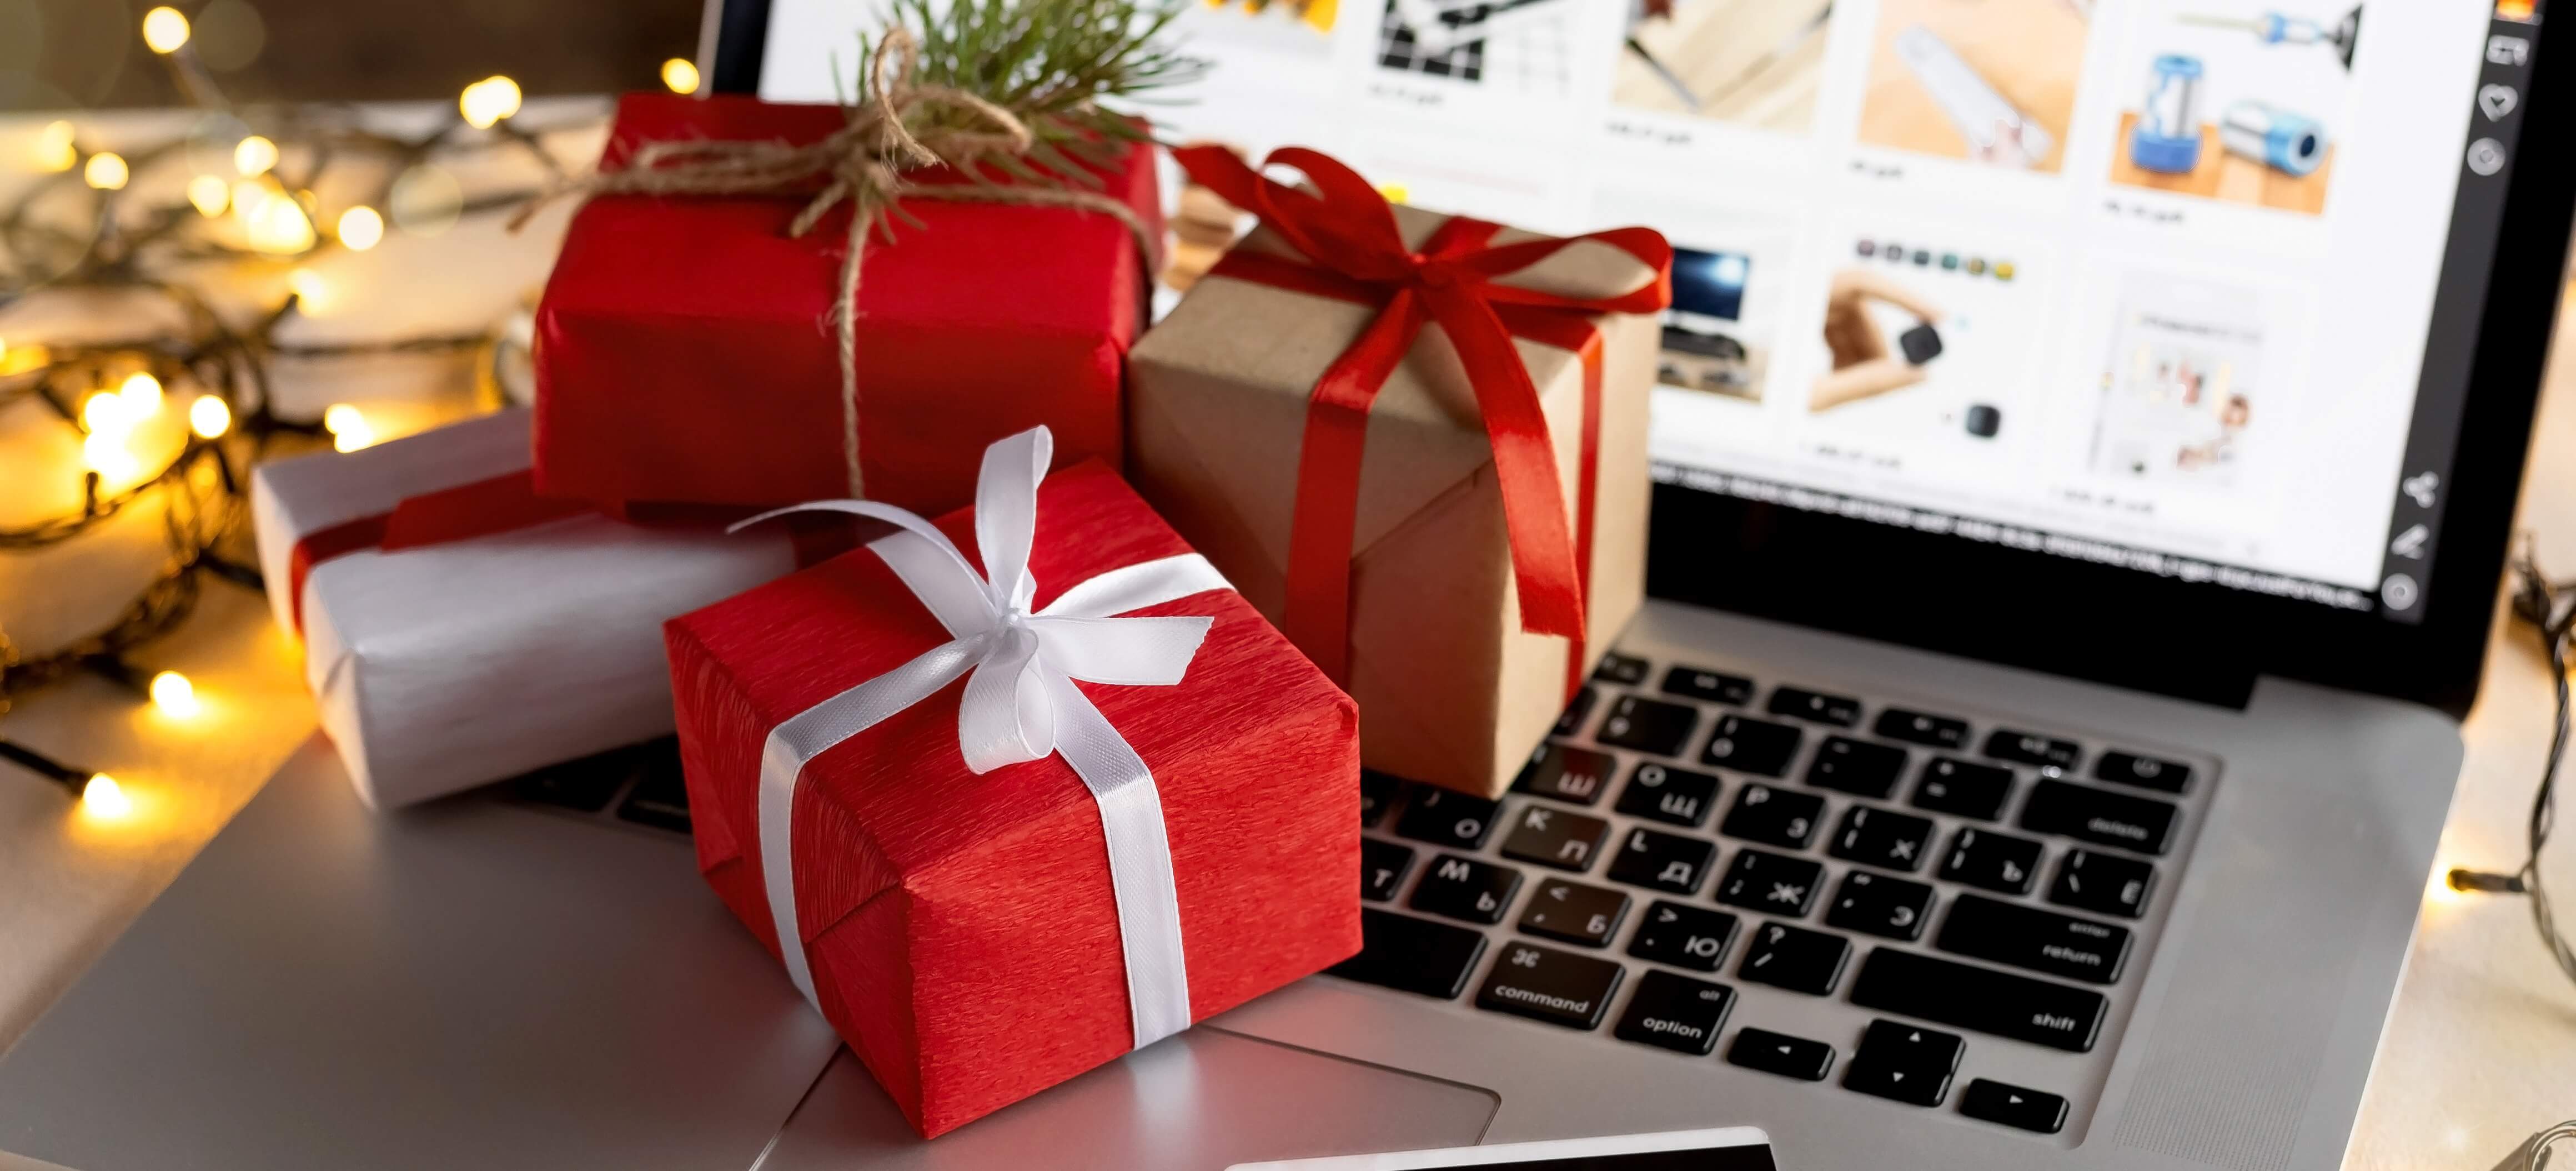 Christmas gifts on laptop computer